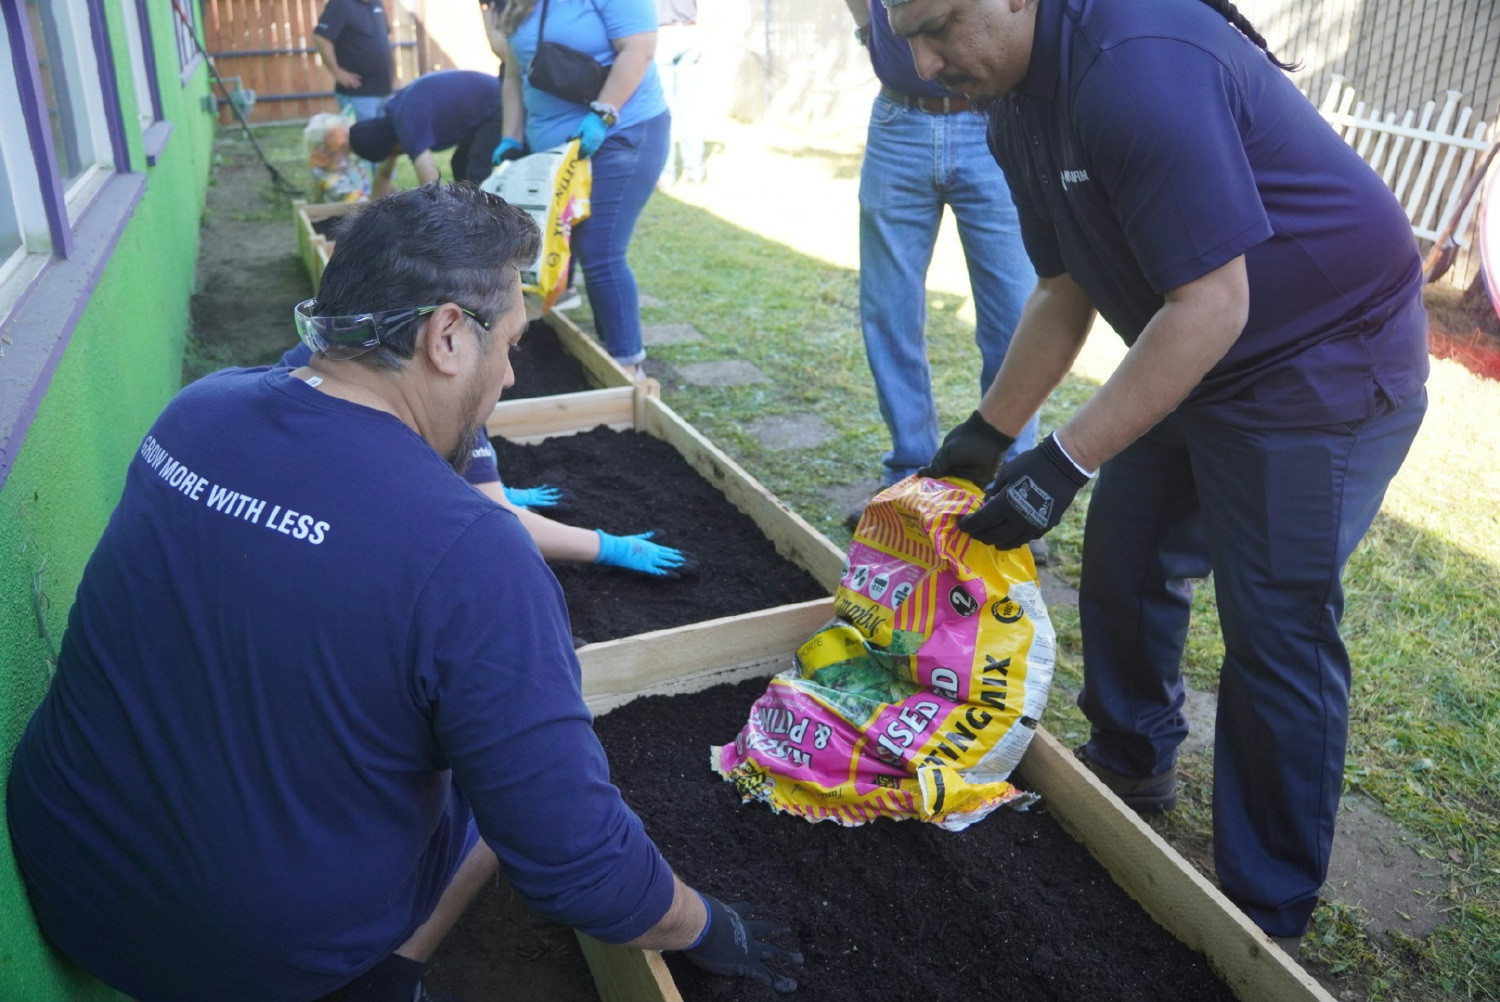 #UsingLessDoingMore Earth Day Campaign. Employees volunteering, showing their dedication! #Partnerforsuccess